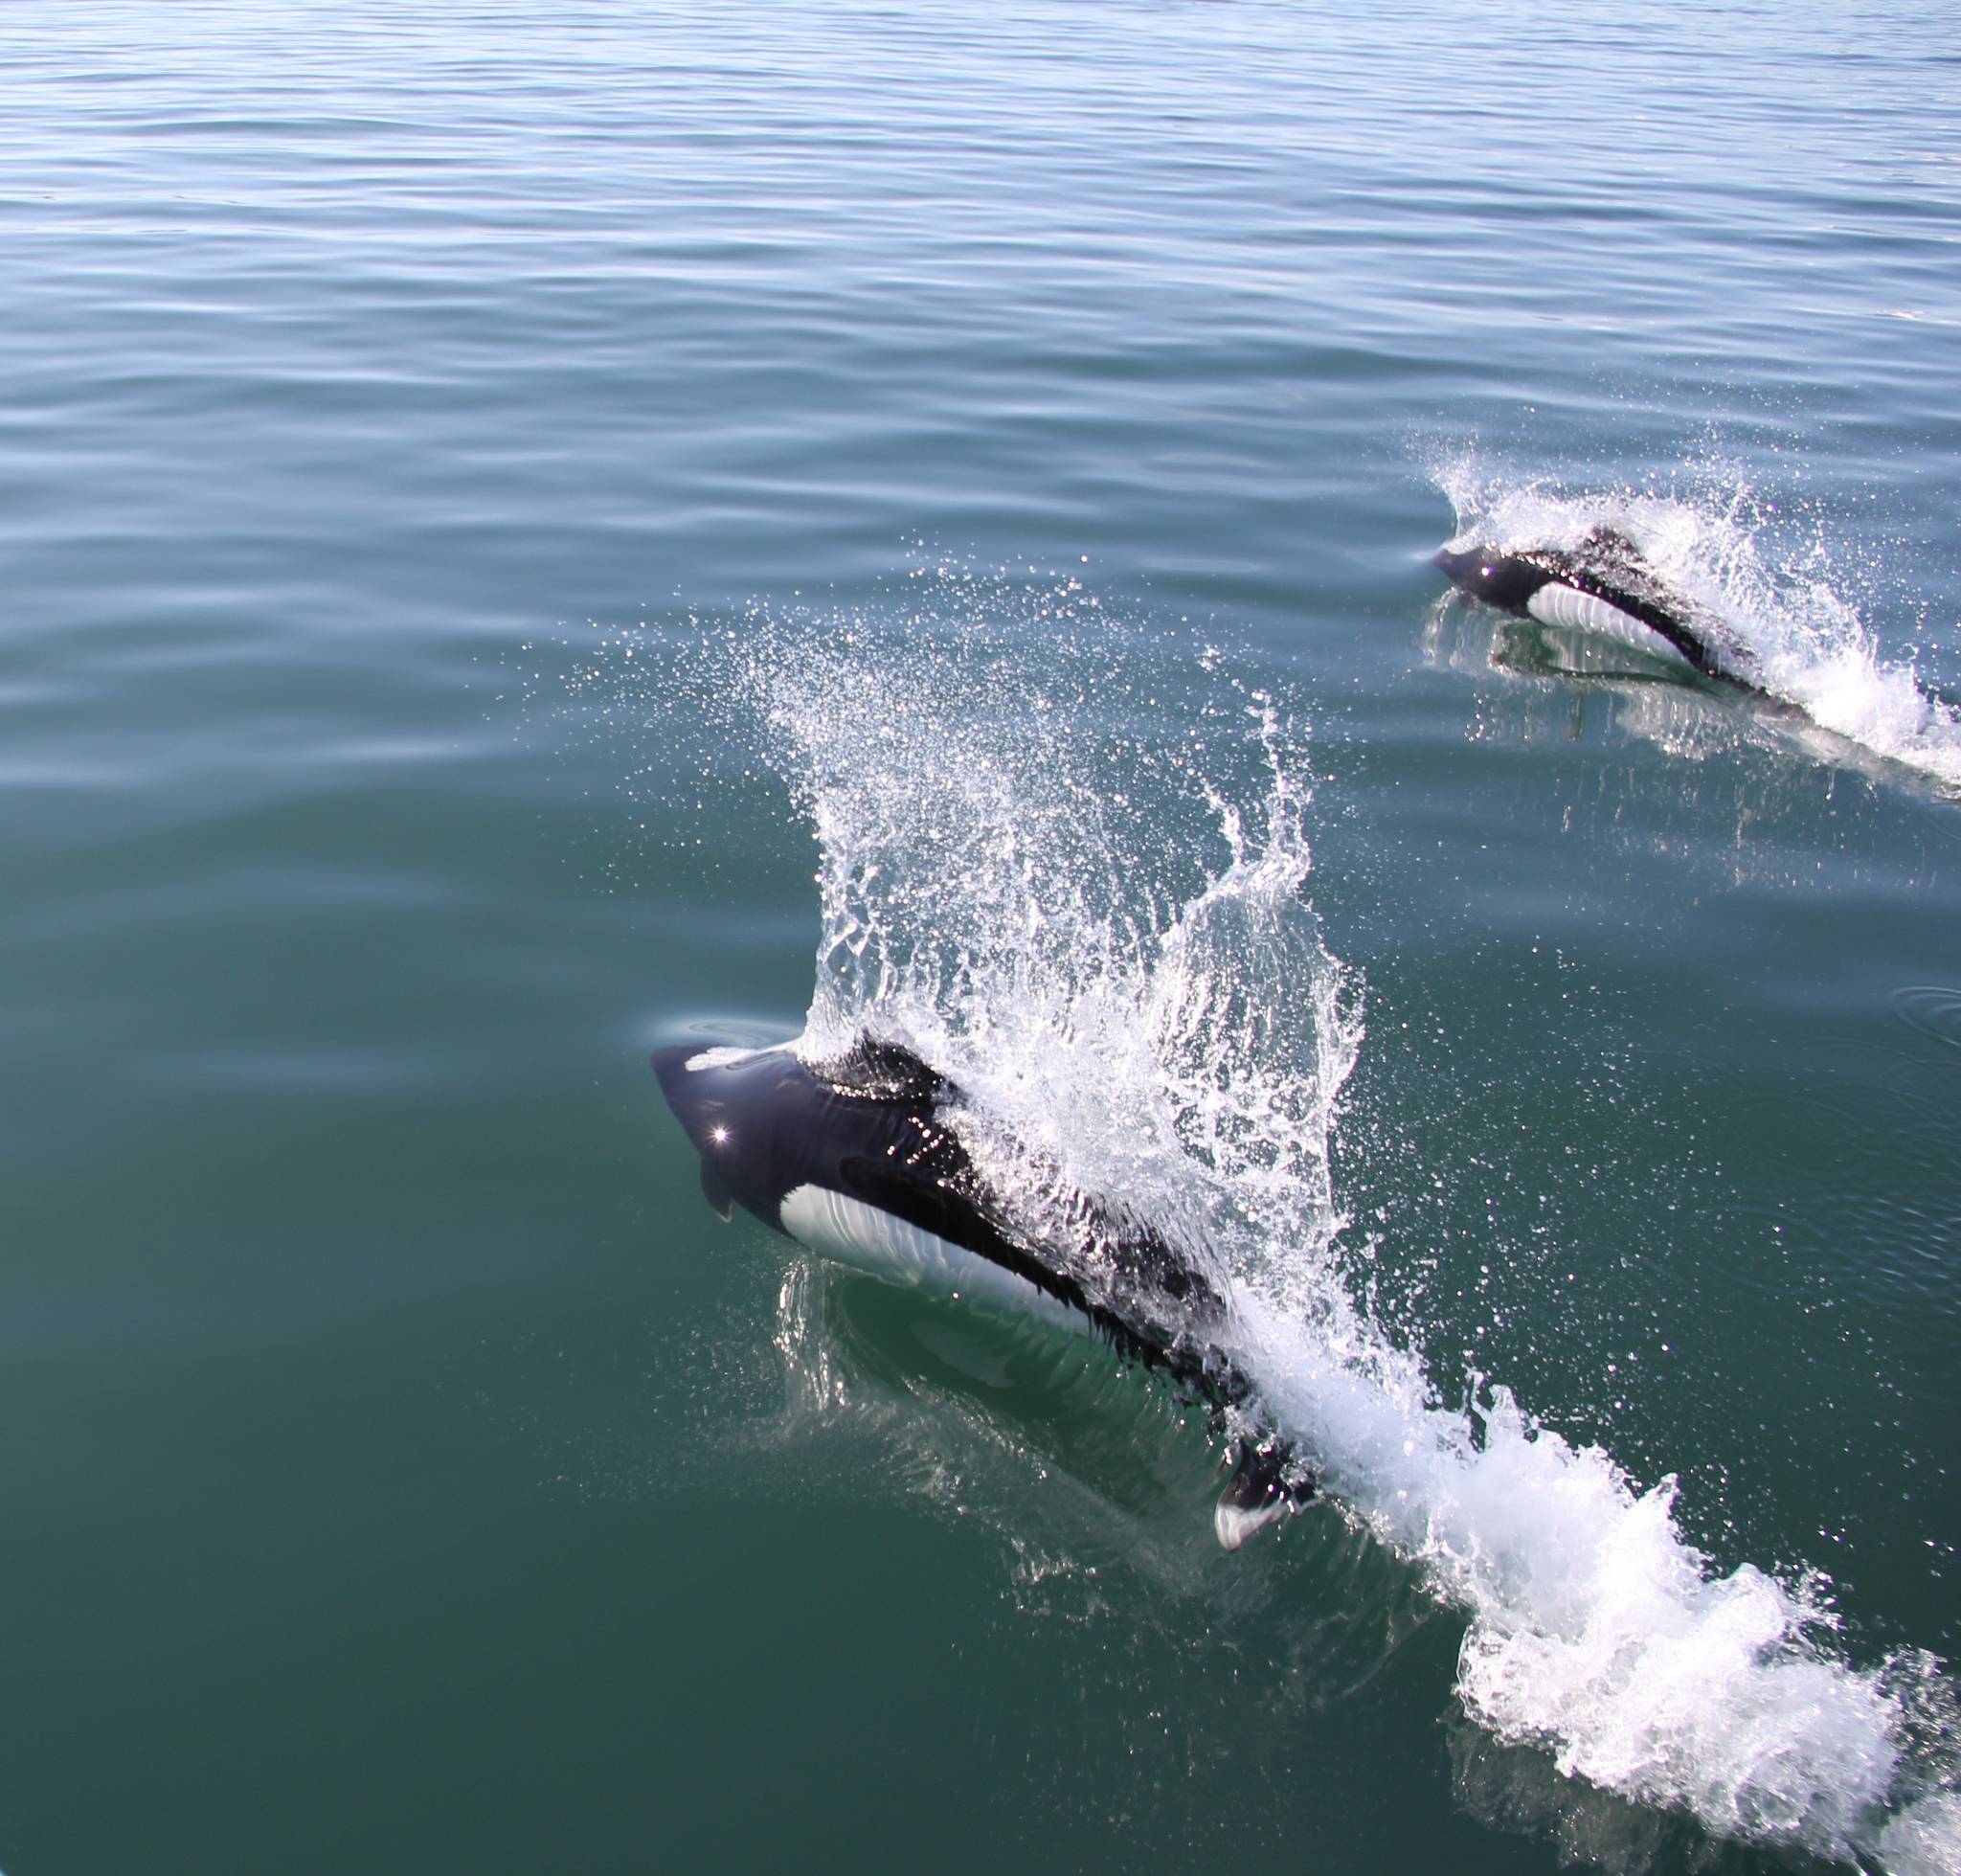 Dall’s porpoises swim in Southern Lynn Canal on May 11. Steve Parker said they were seen while returning to Auke Bay from St James Bay. “A group of about 20 Dall’s Porpoises escorted our sailboat for nearly 30 minutes on our way home,” Parker said. (Courtesy Photo | Steve Parker)